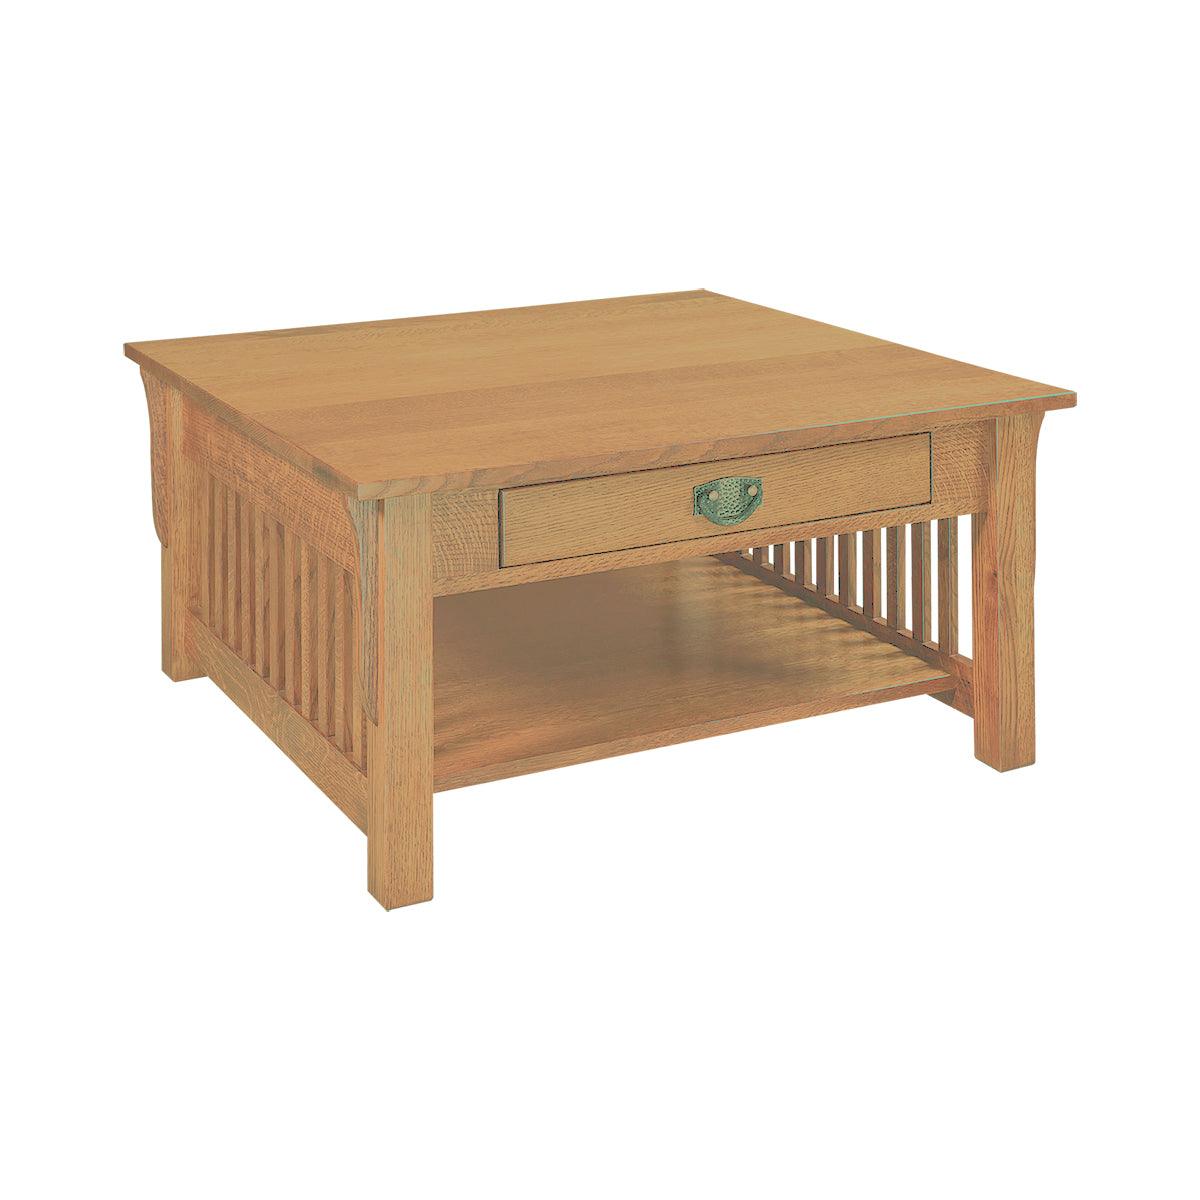 Prairie Mission Square Spindle Coffee Table with Drawer